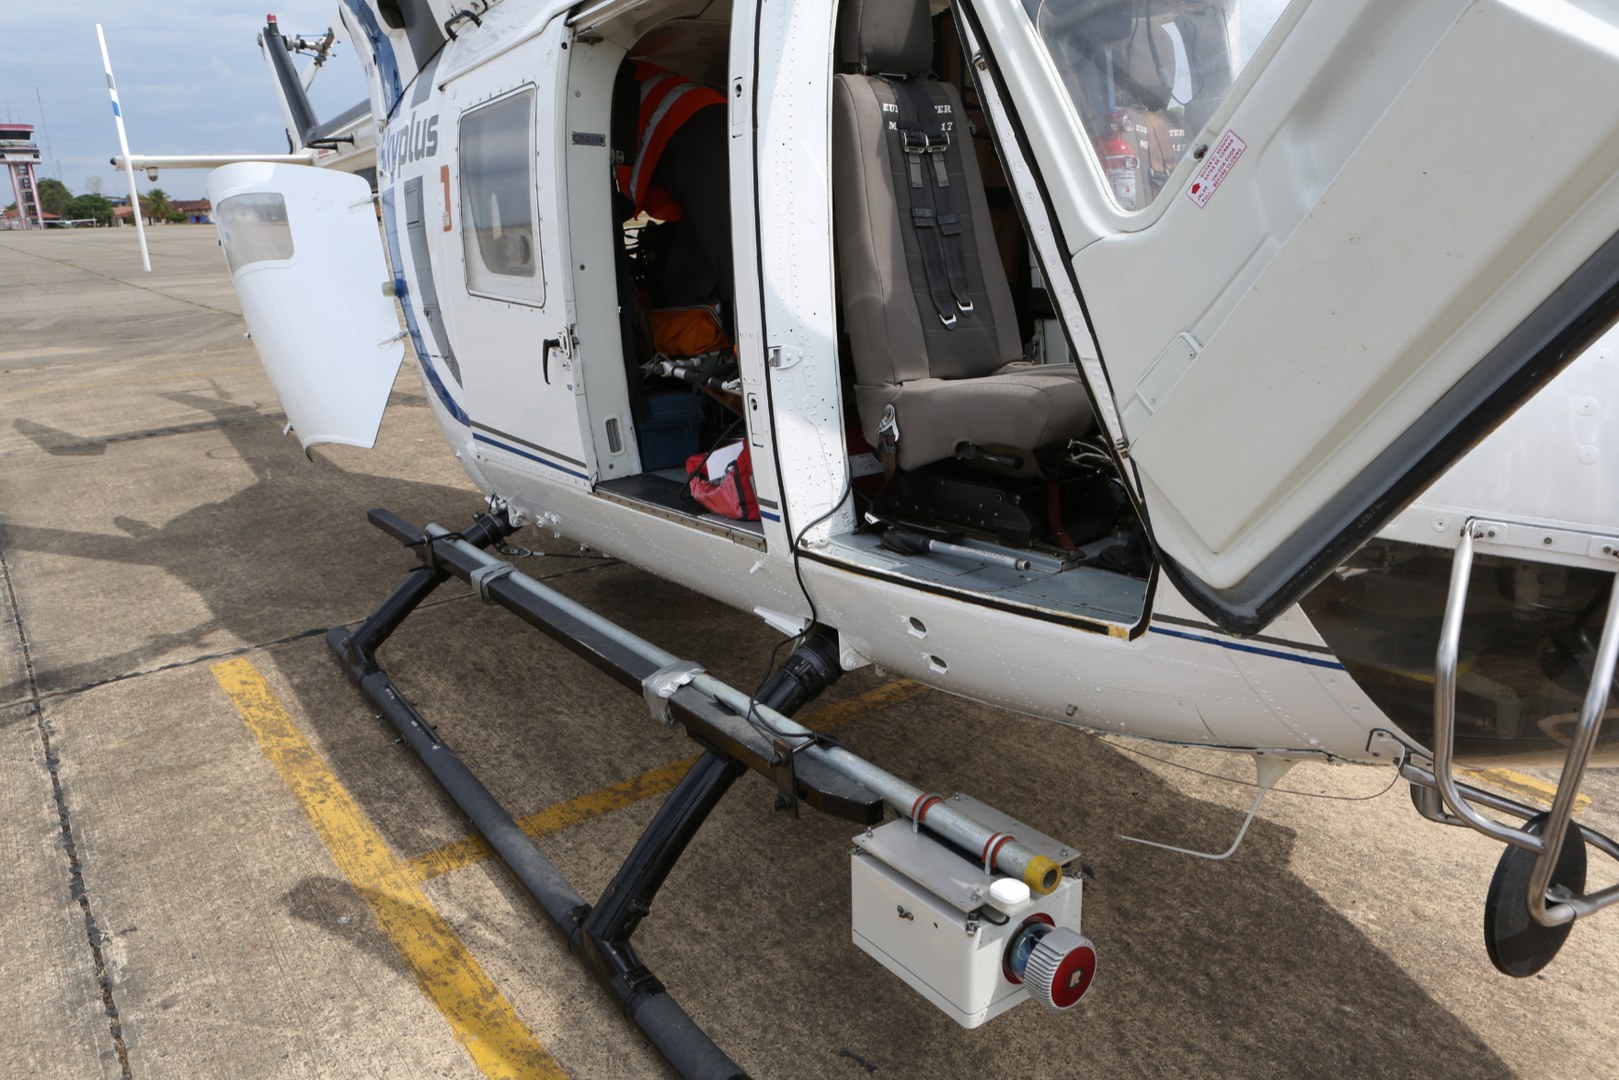 The Lidar scanner, attached to the helicopter